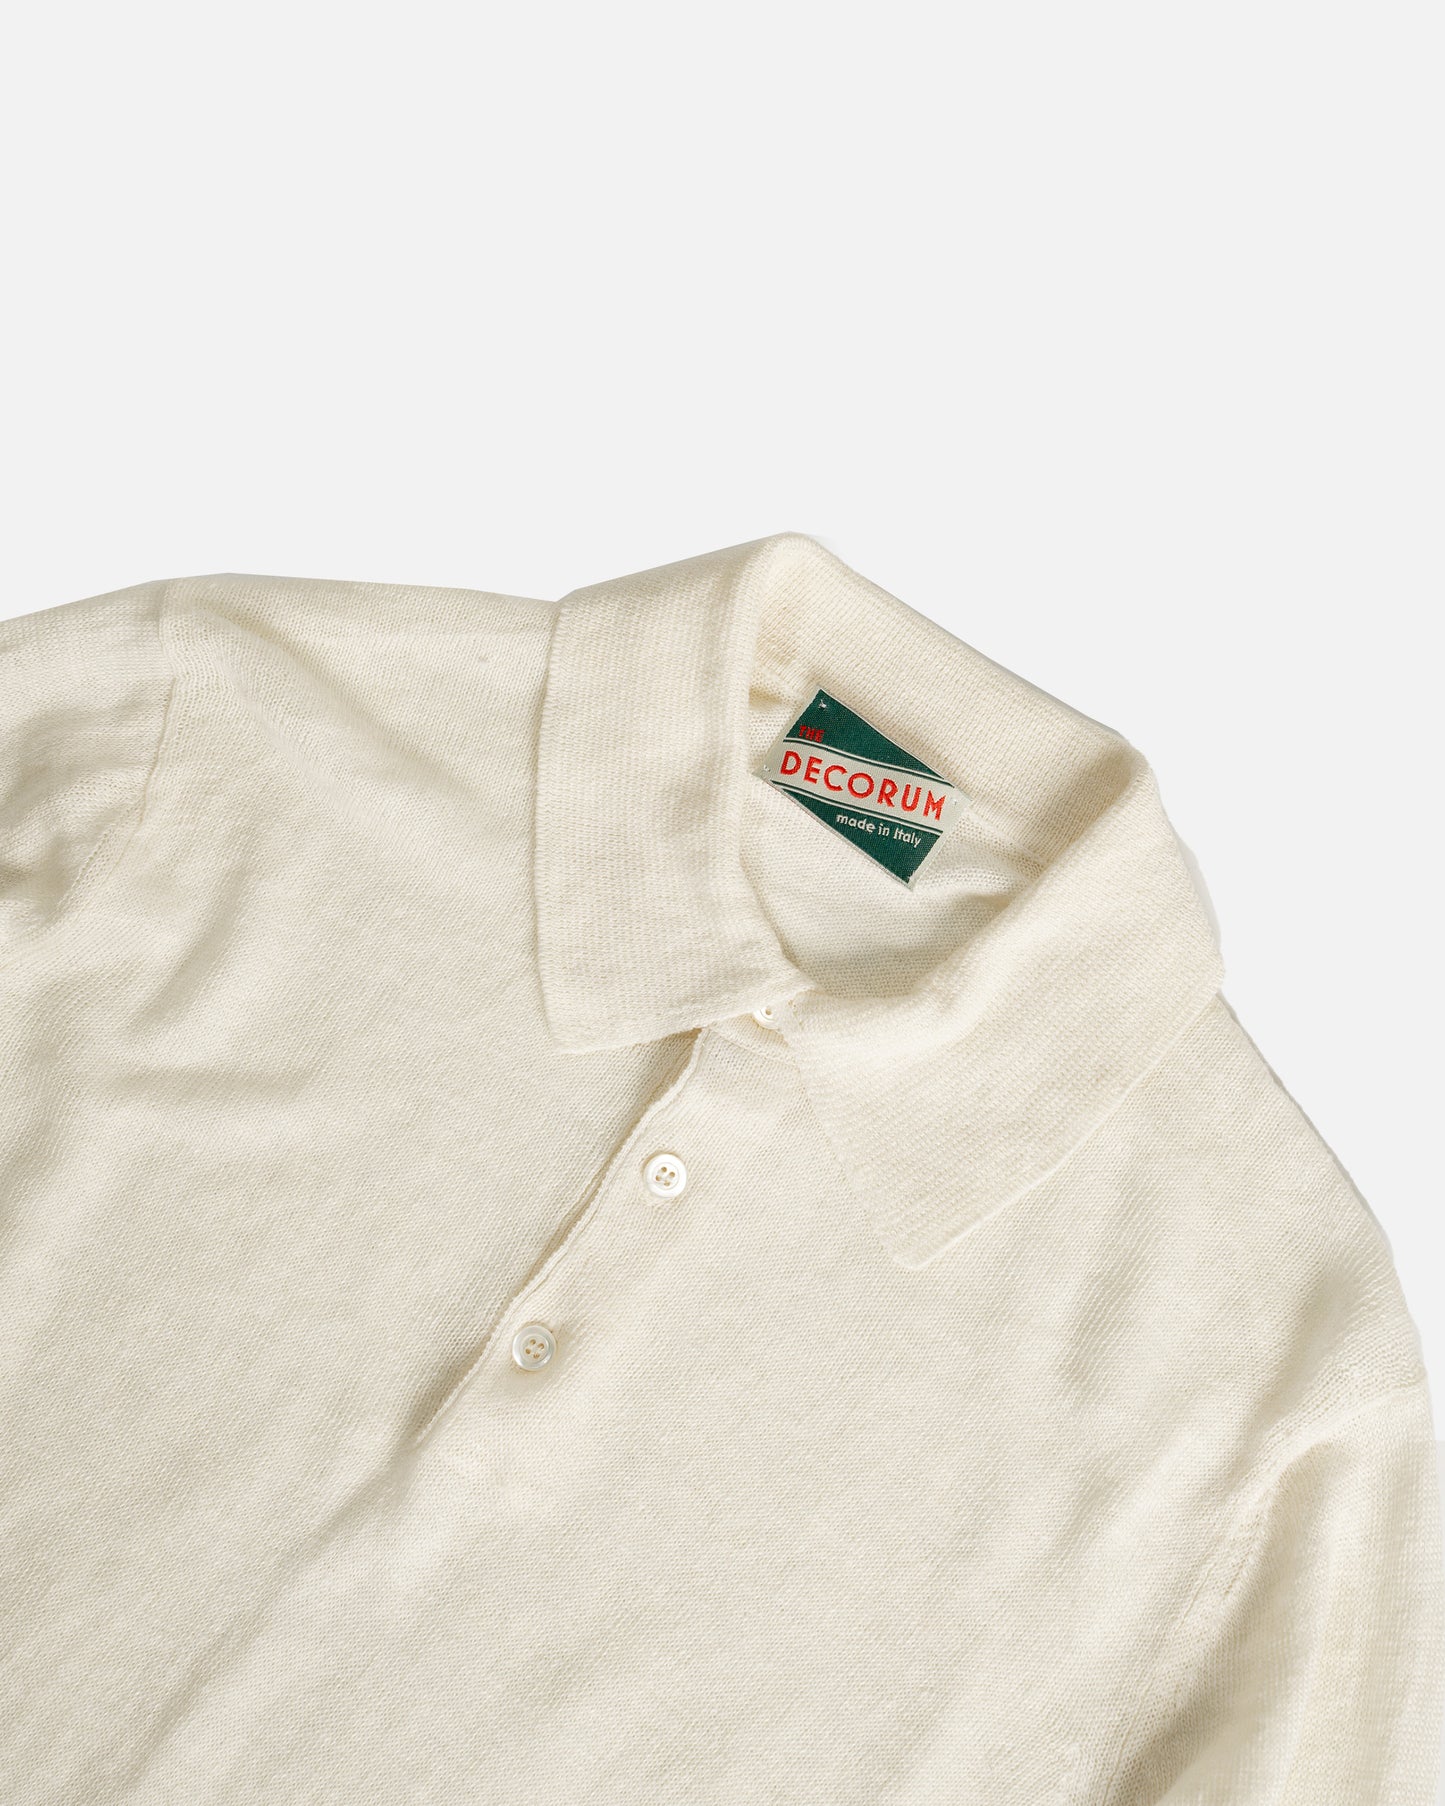 The Decorum Knitted Linen Polo Shirt in Cream